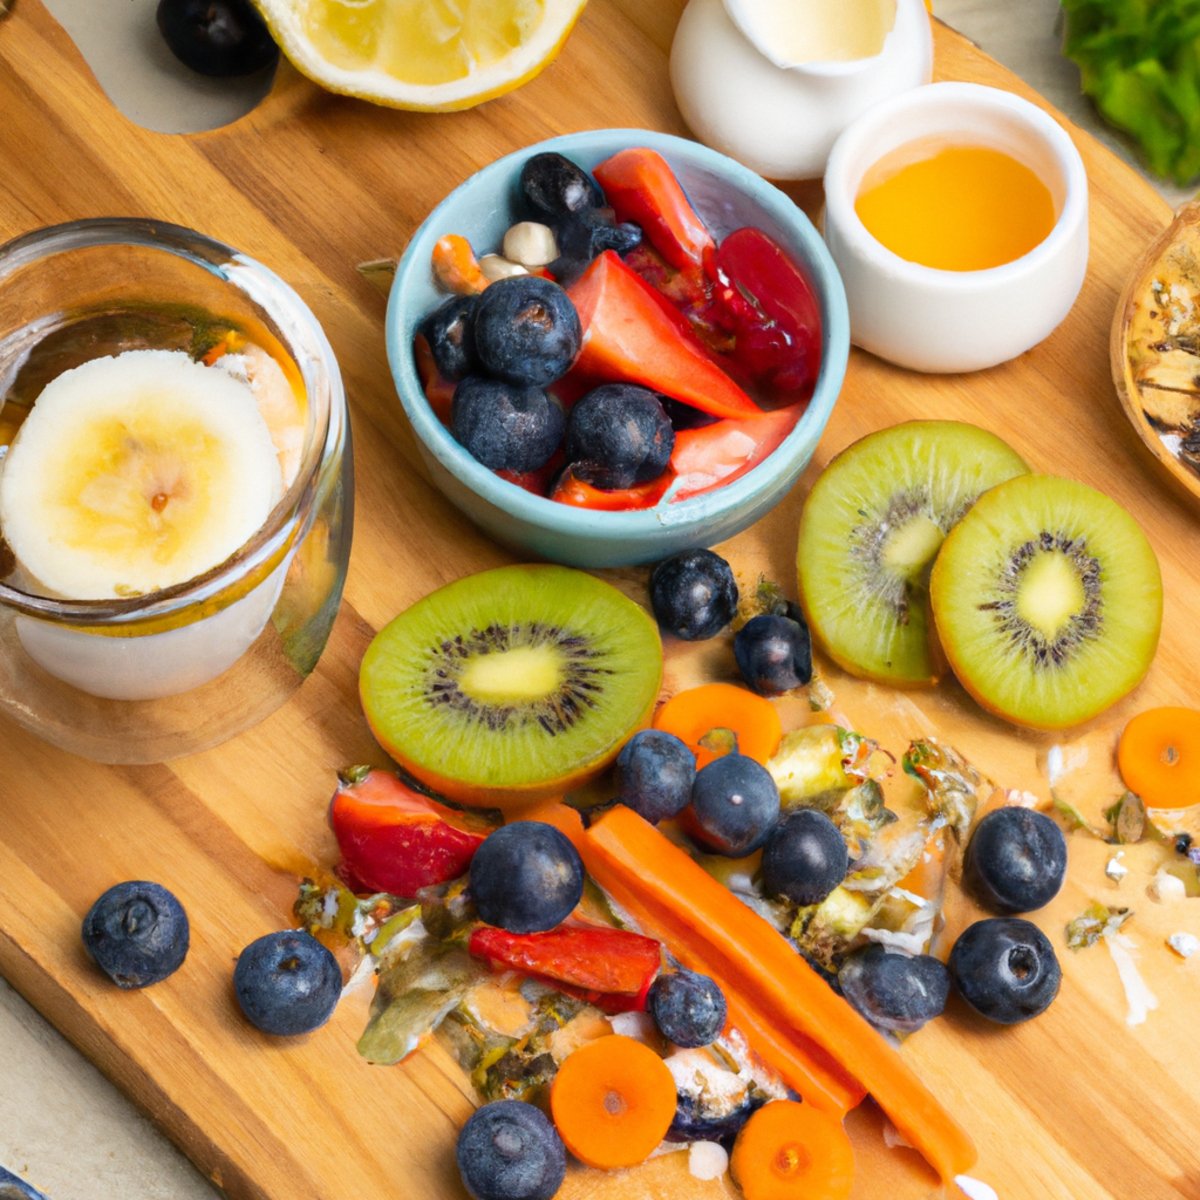 The photo features a wooden cutting board with a variety of colorful fruits and vegetables, including sliced kiwi, strawberries, blueberries, and carrots. In the center of the board is a small dish filled with probiotic-rich yogurt, topped with a sprinkle of granola and a drizzle of honey. A glass of water with lemon slices sits beside the board, emphasizing the importance of hydration for gut health. The vibrant colors and fresh ingredients in the photo convey the message that incorporating probiotics into your diet can be both delicious and beneficial for your overall health.